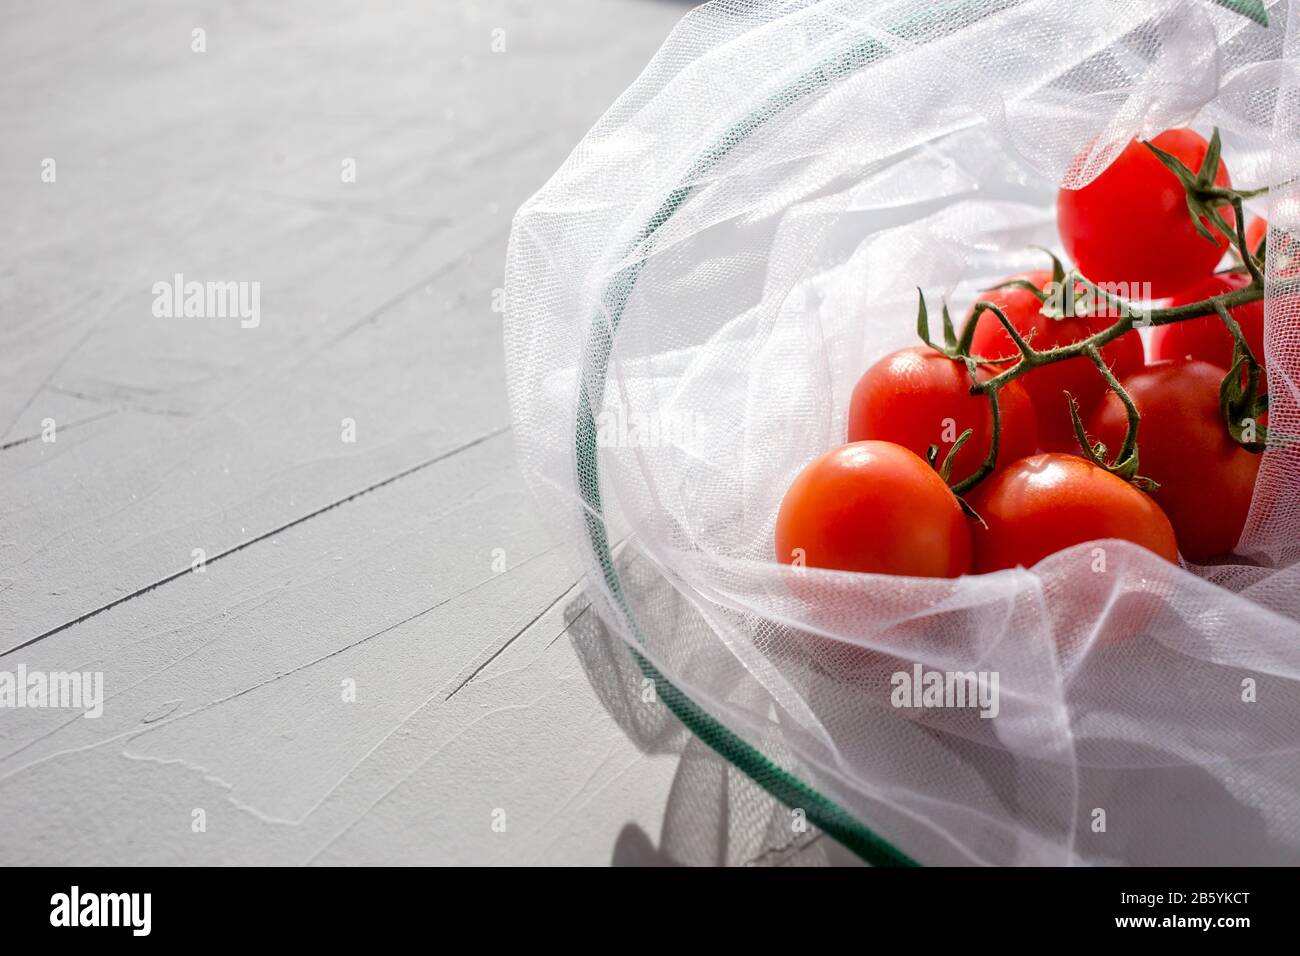 The reusable organza net bag for shopping with tomatoes a grey background.  Concept of no plastic, zero waste, reusable life. Copy space. Stock Photo